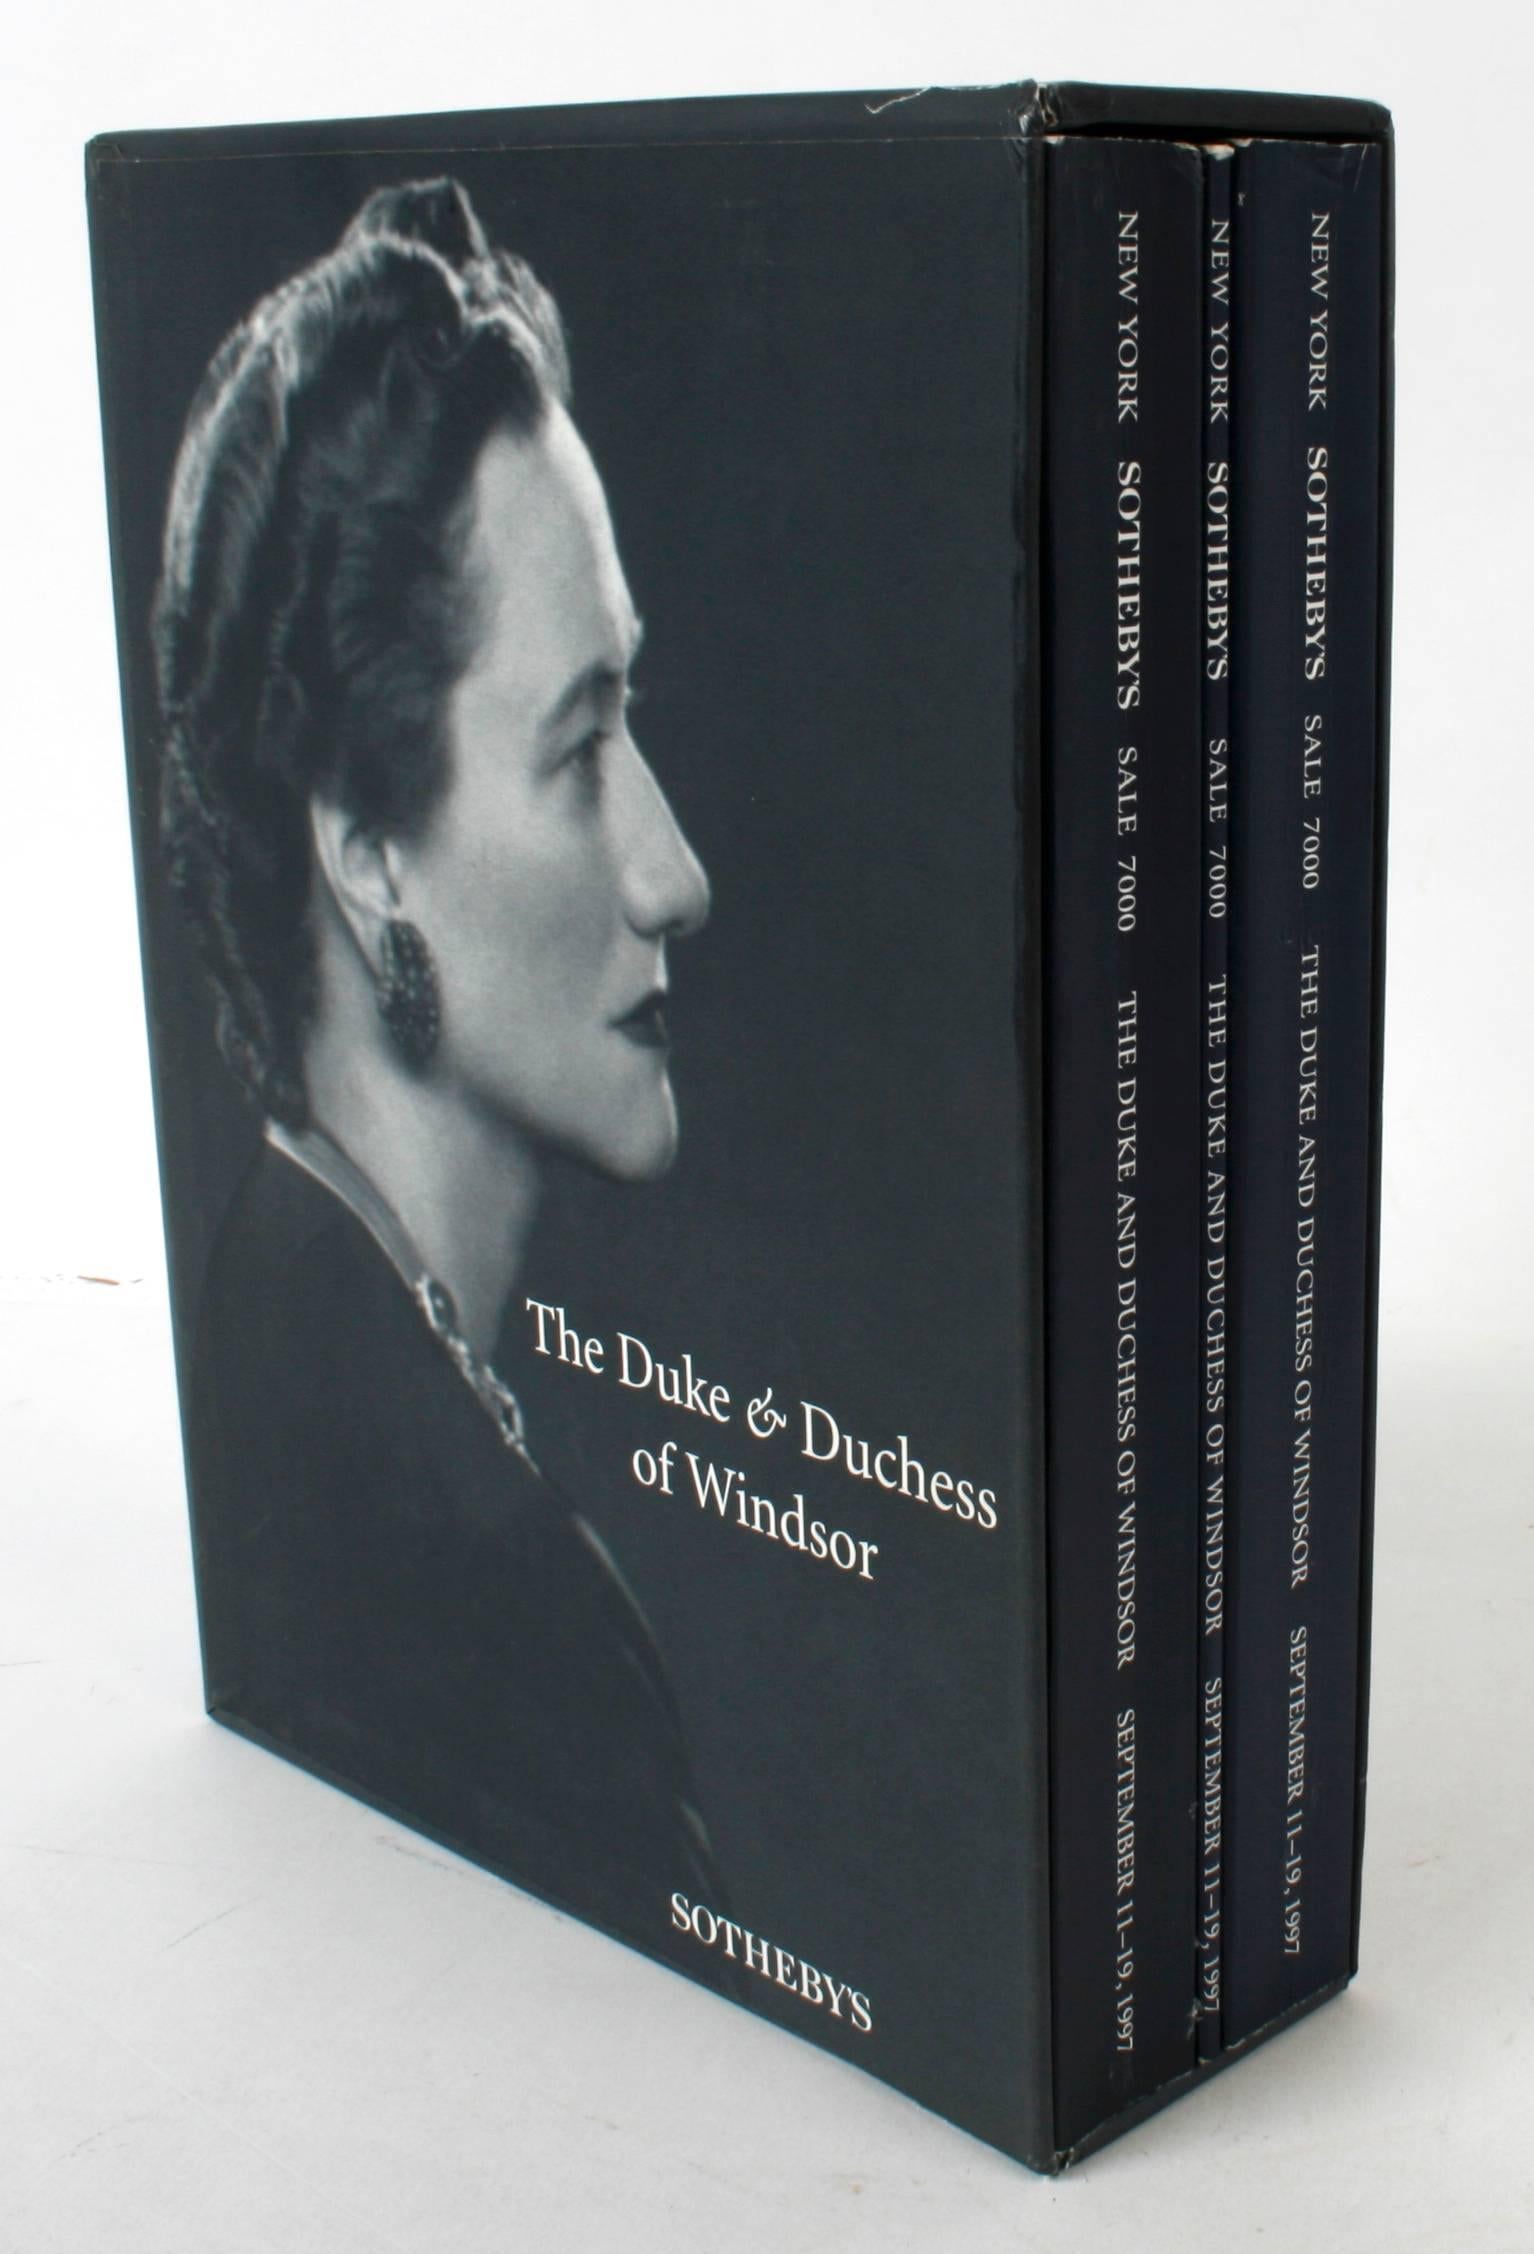 Sotheby's catalogues from the Duke and Duchess of Windsor Auction from September 11-19, 1997. New York: Sotheby's, 1997. First edition soft covers with slip case. A three volume set with slip case of items auctioned from the Duke and Duchess of